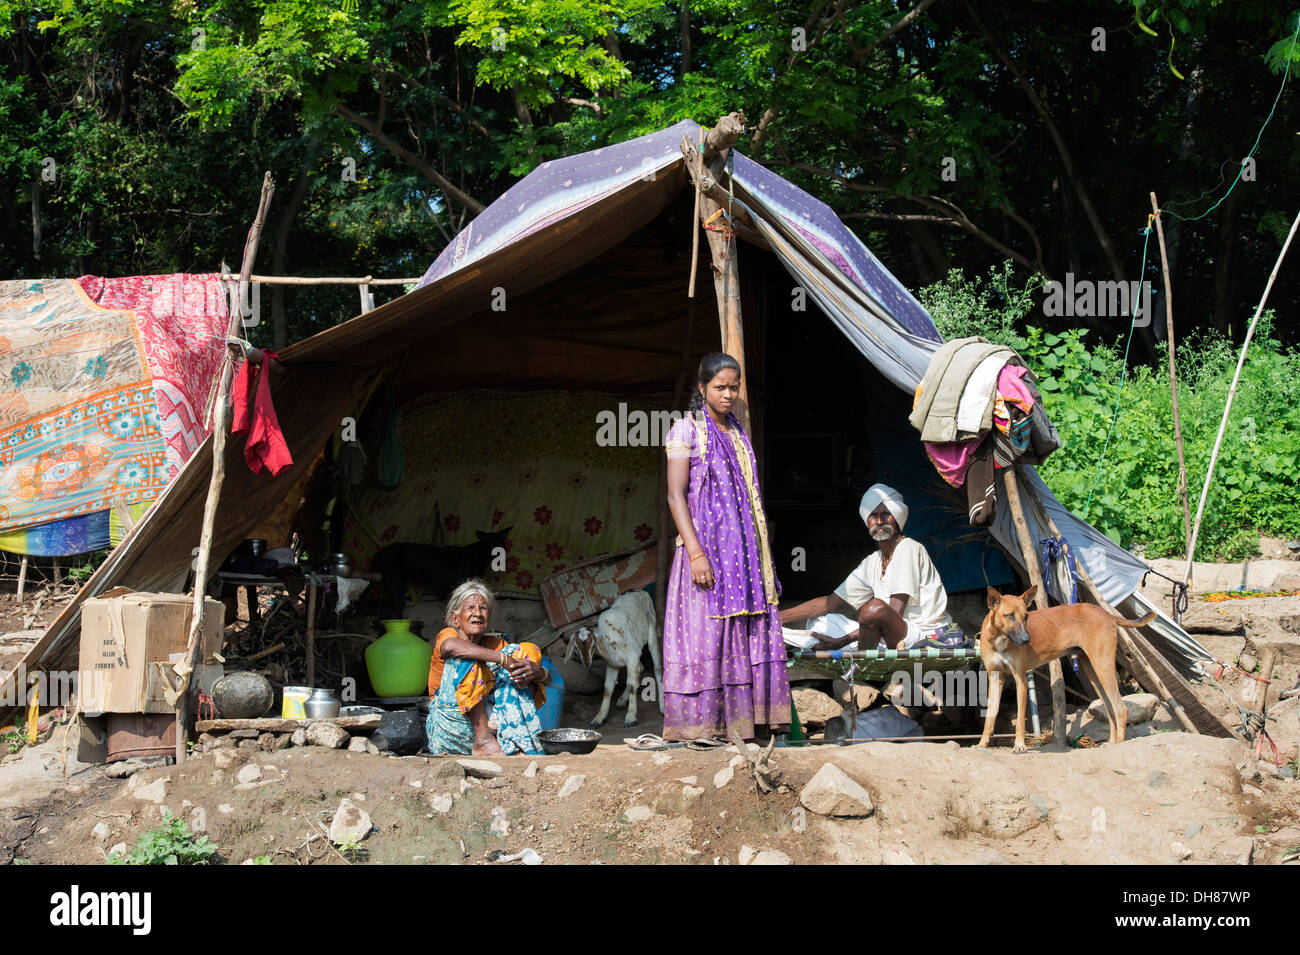 Lower caste Indian family sitting and standing by their bender / tent / shelter. Andhra Pradesh, India. Stock Photo